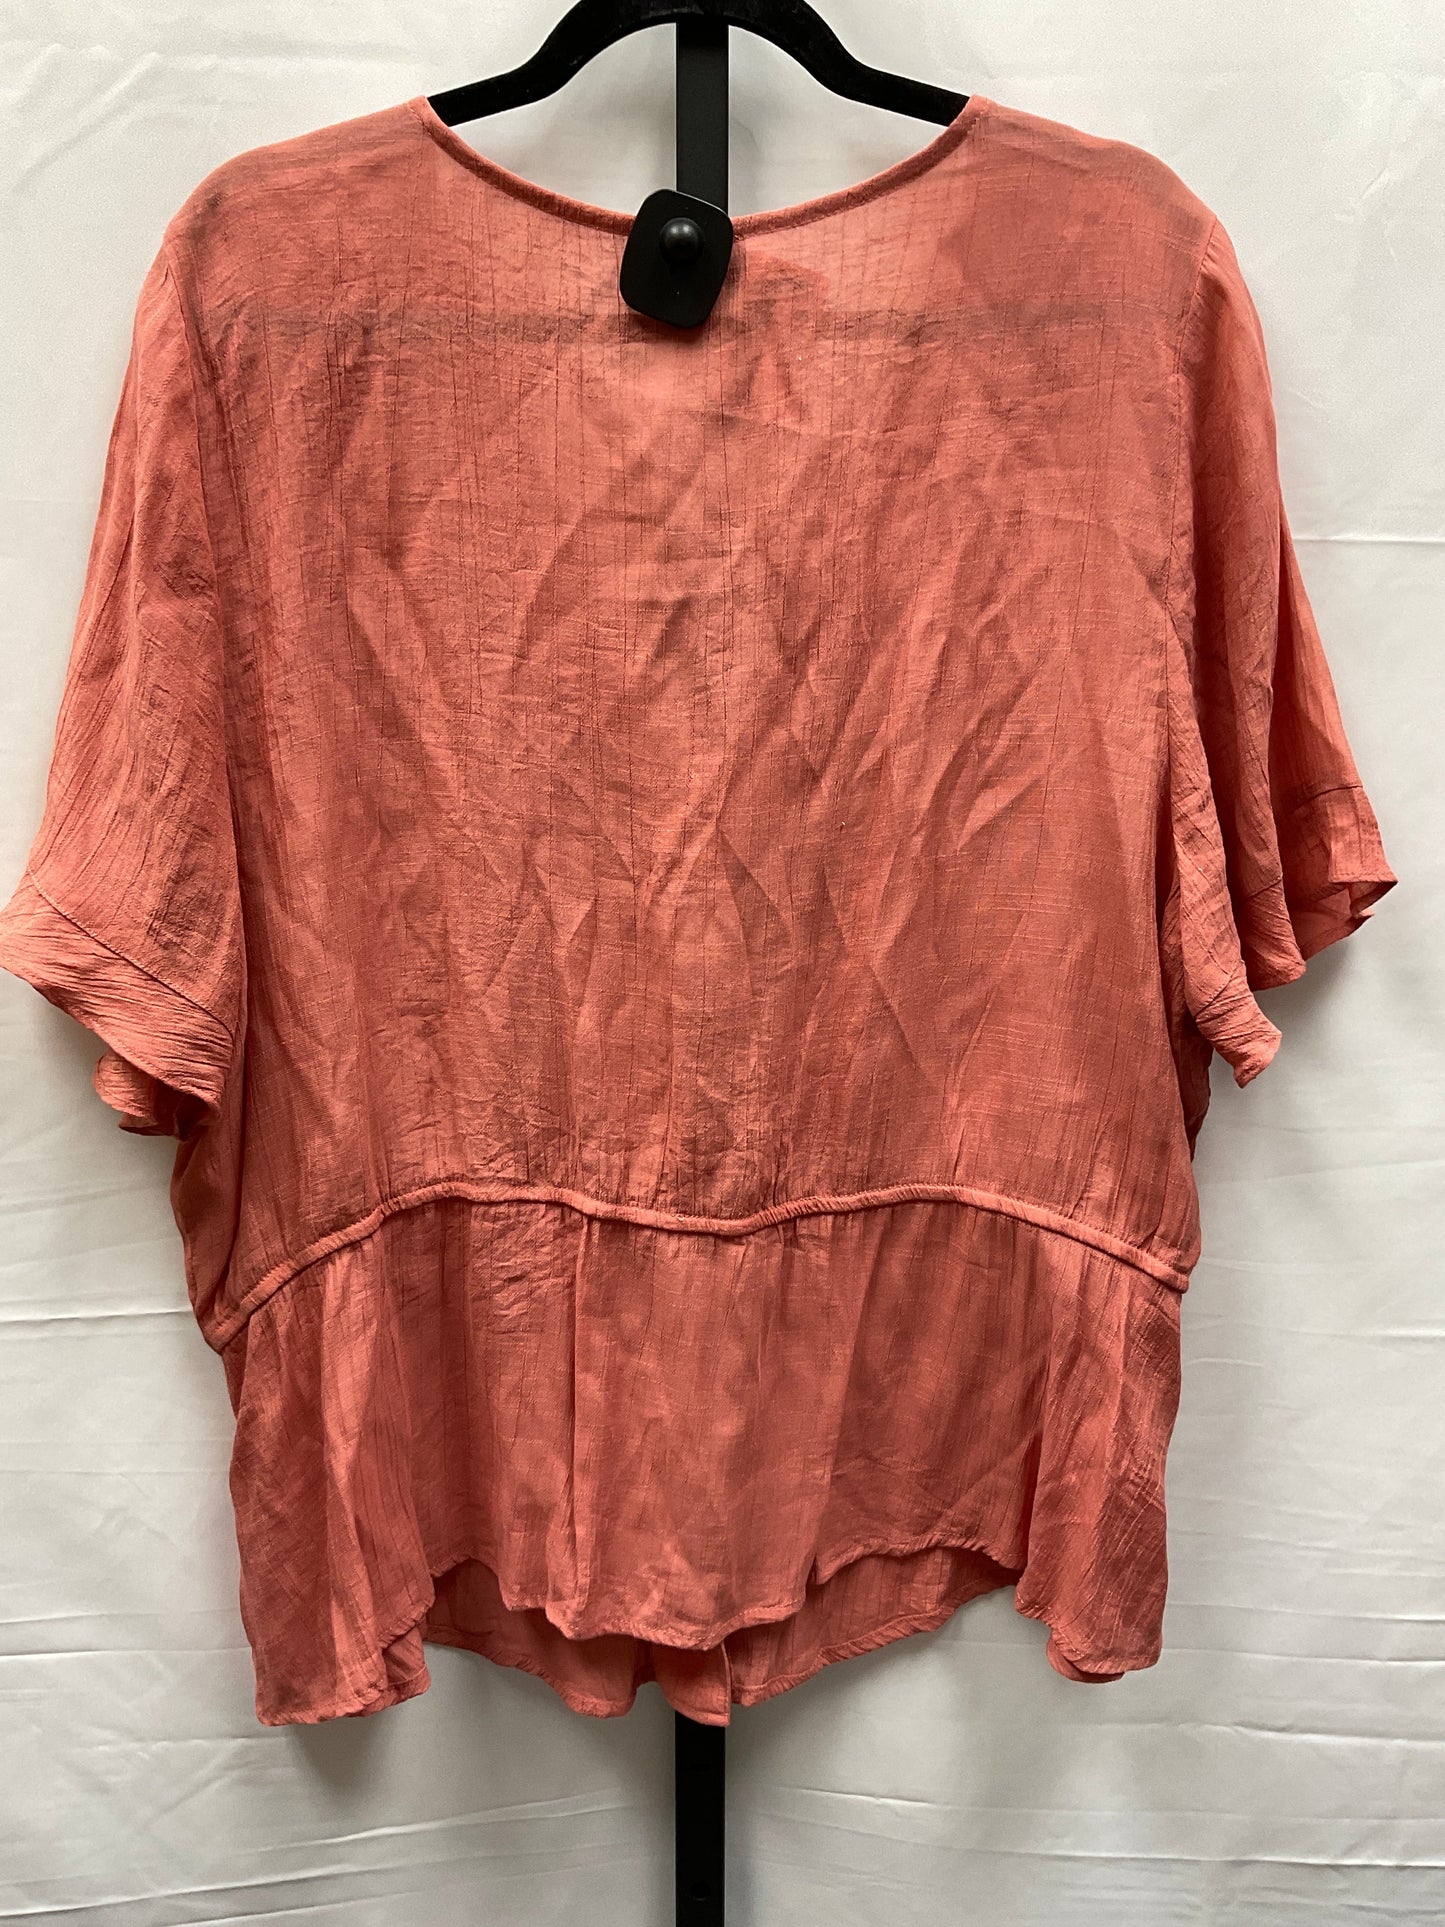 Pink Top Short Sleeve Clothes Mentor, Size 3x